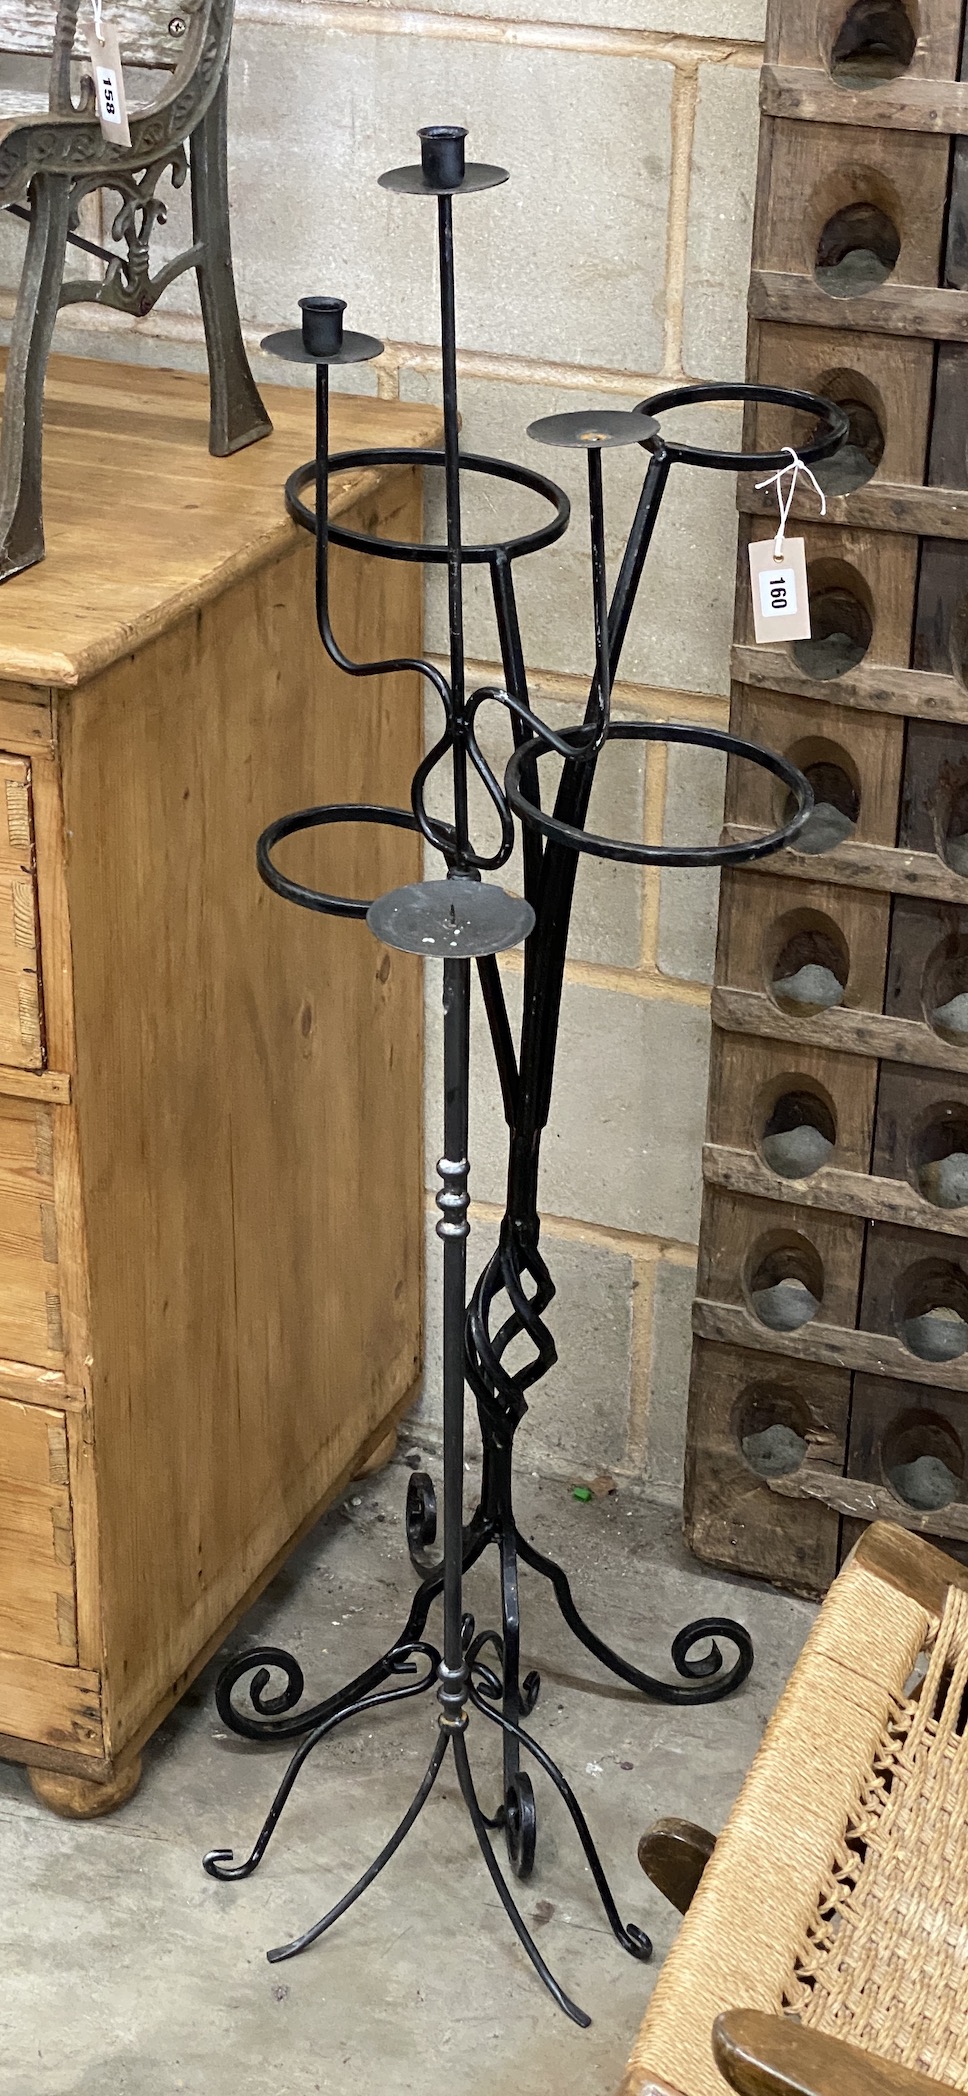 A wrought iron pot stand and two candle holders                                                                                                                                                                             